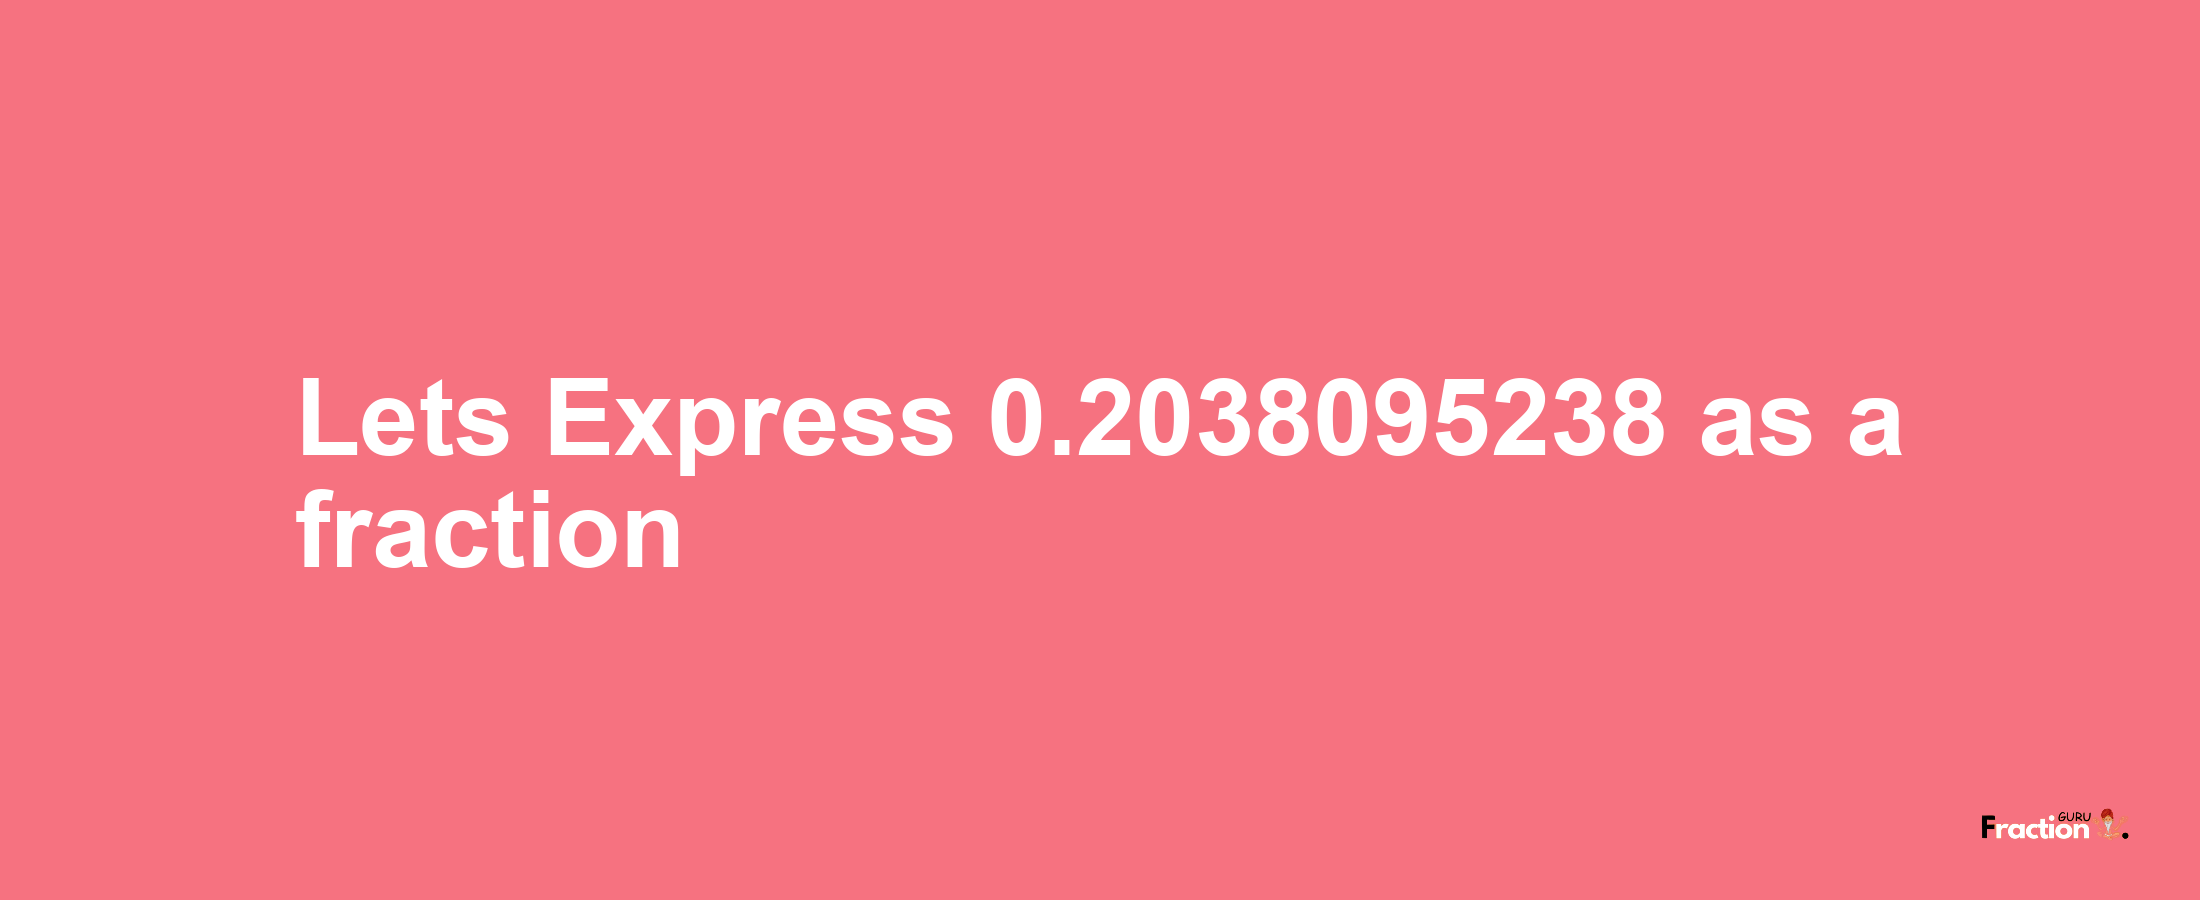 Lets Express 0.2038095238 as afraction